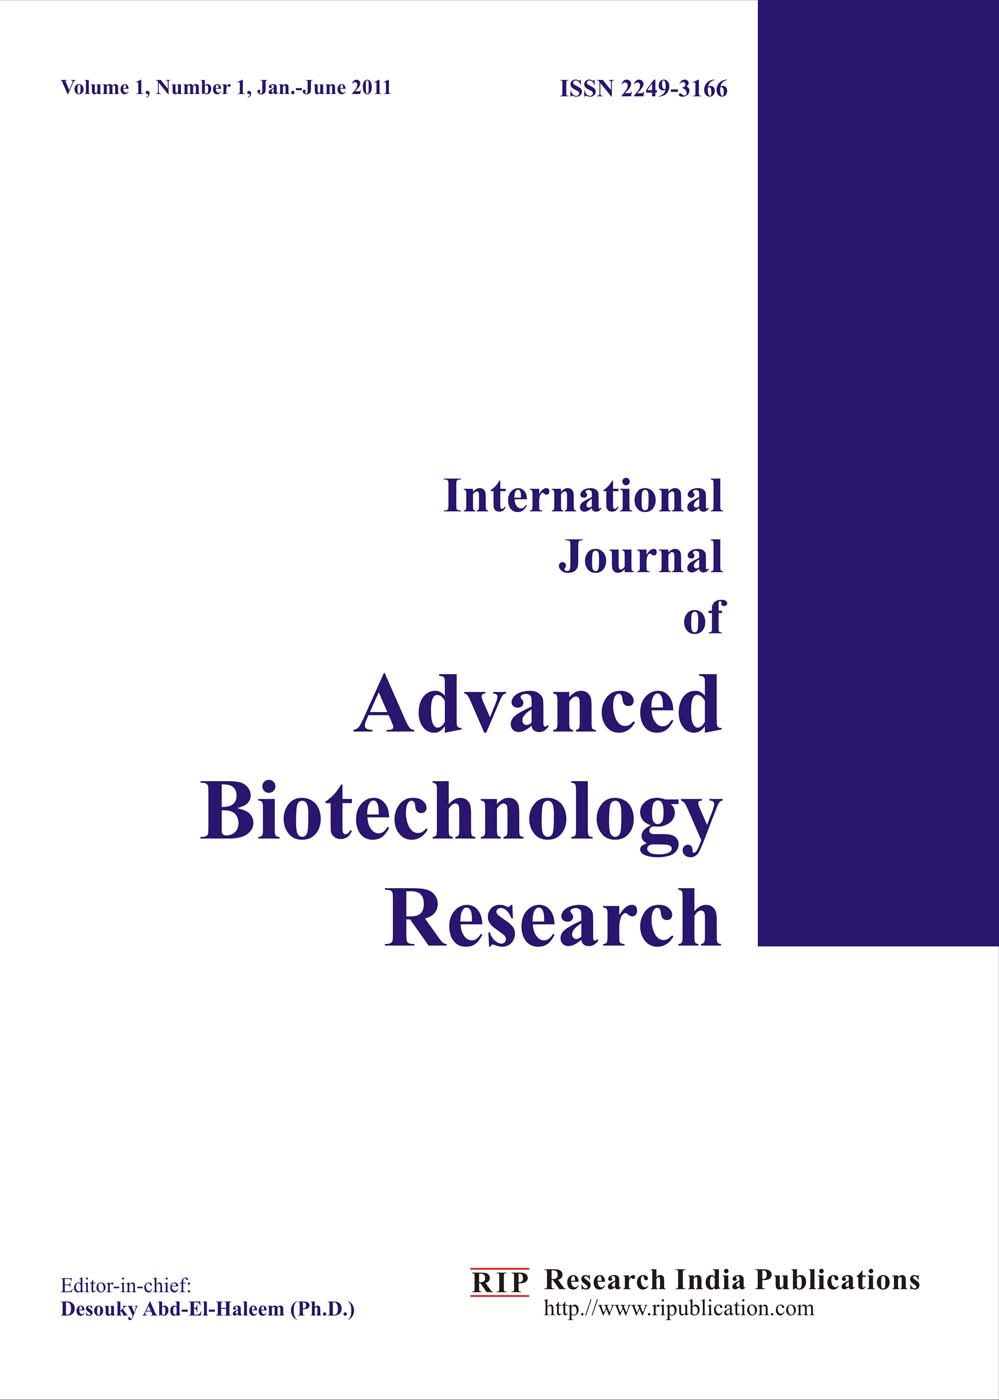 Buy now to Biotechnology, chemistry Research Journal Magazine